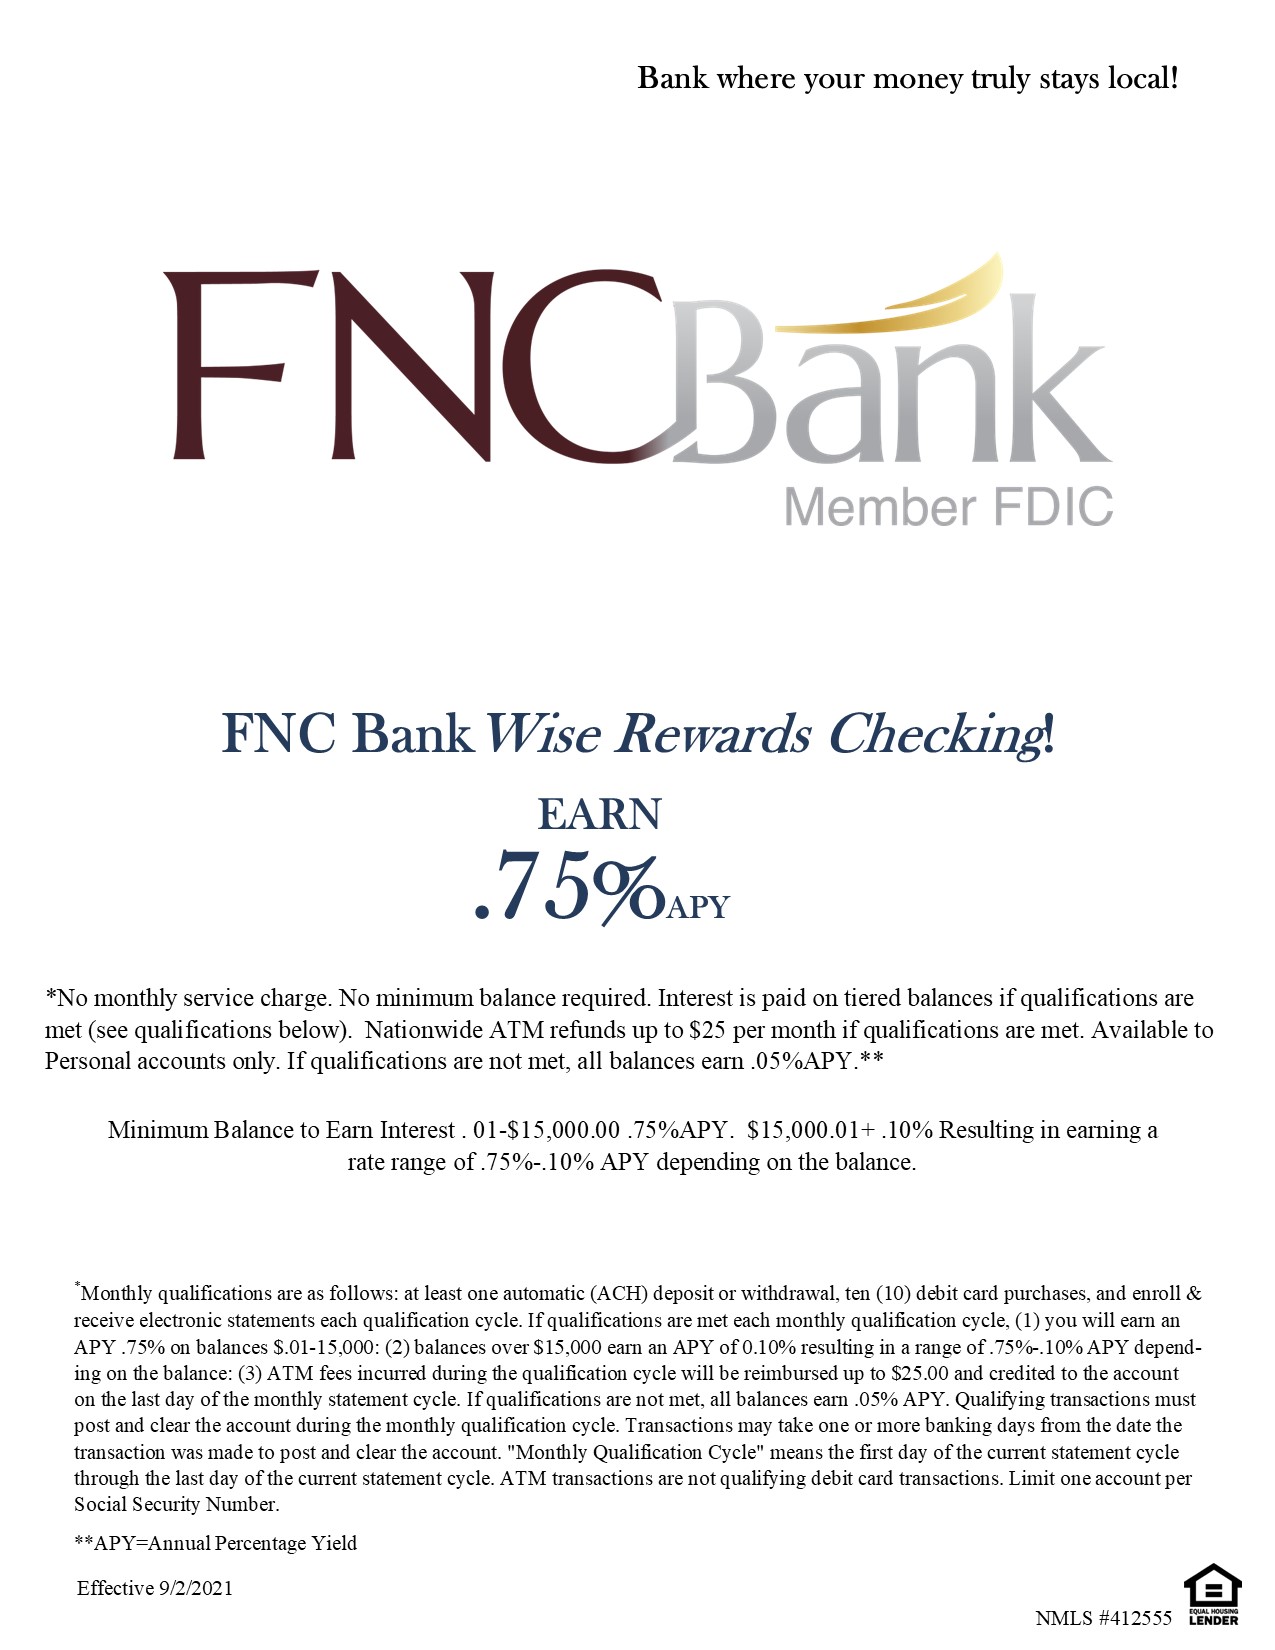 FNC Bank WISE checking